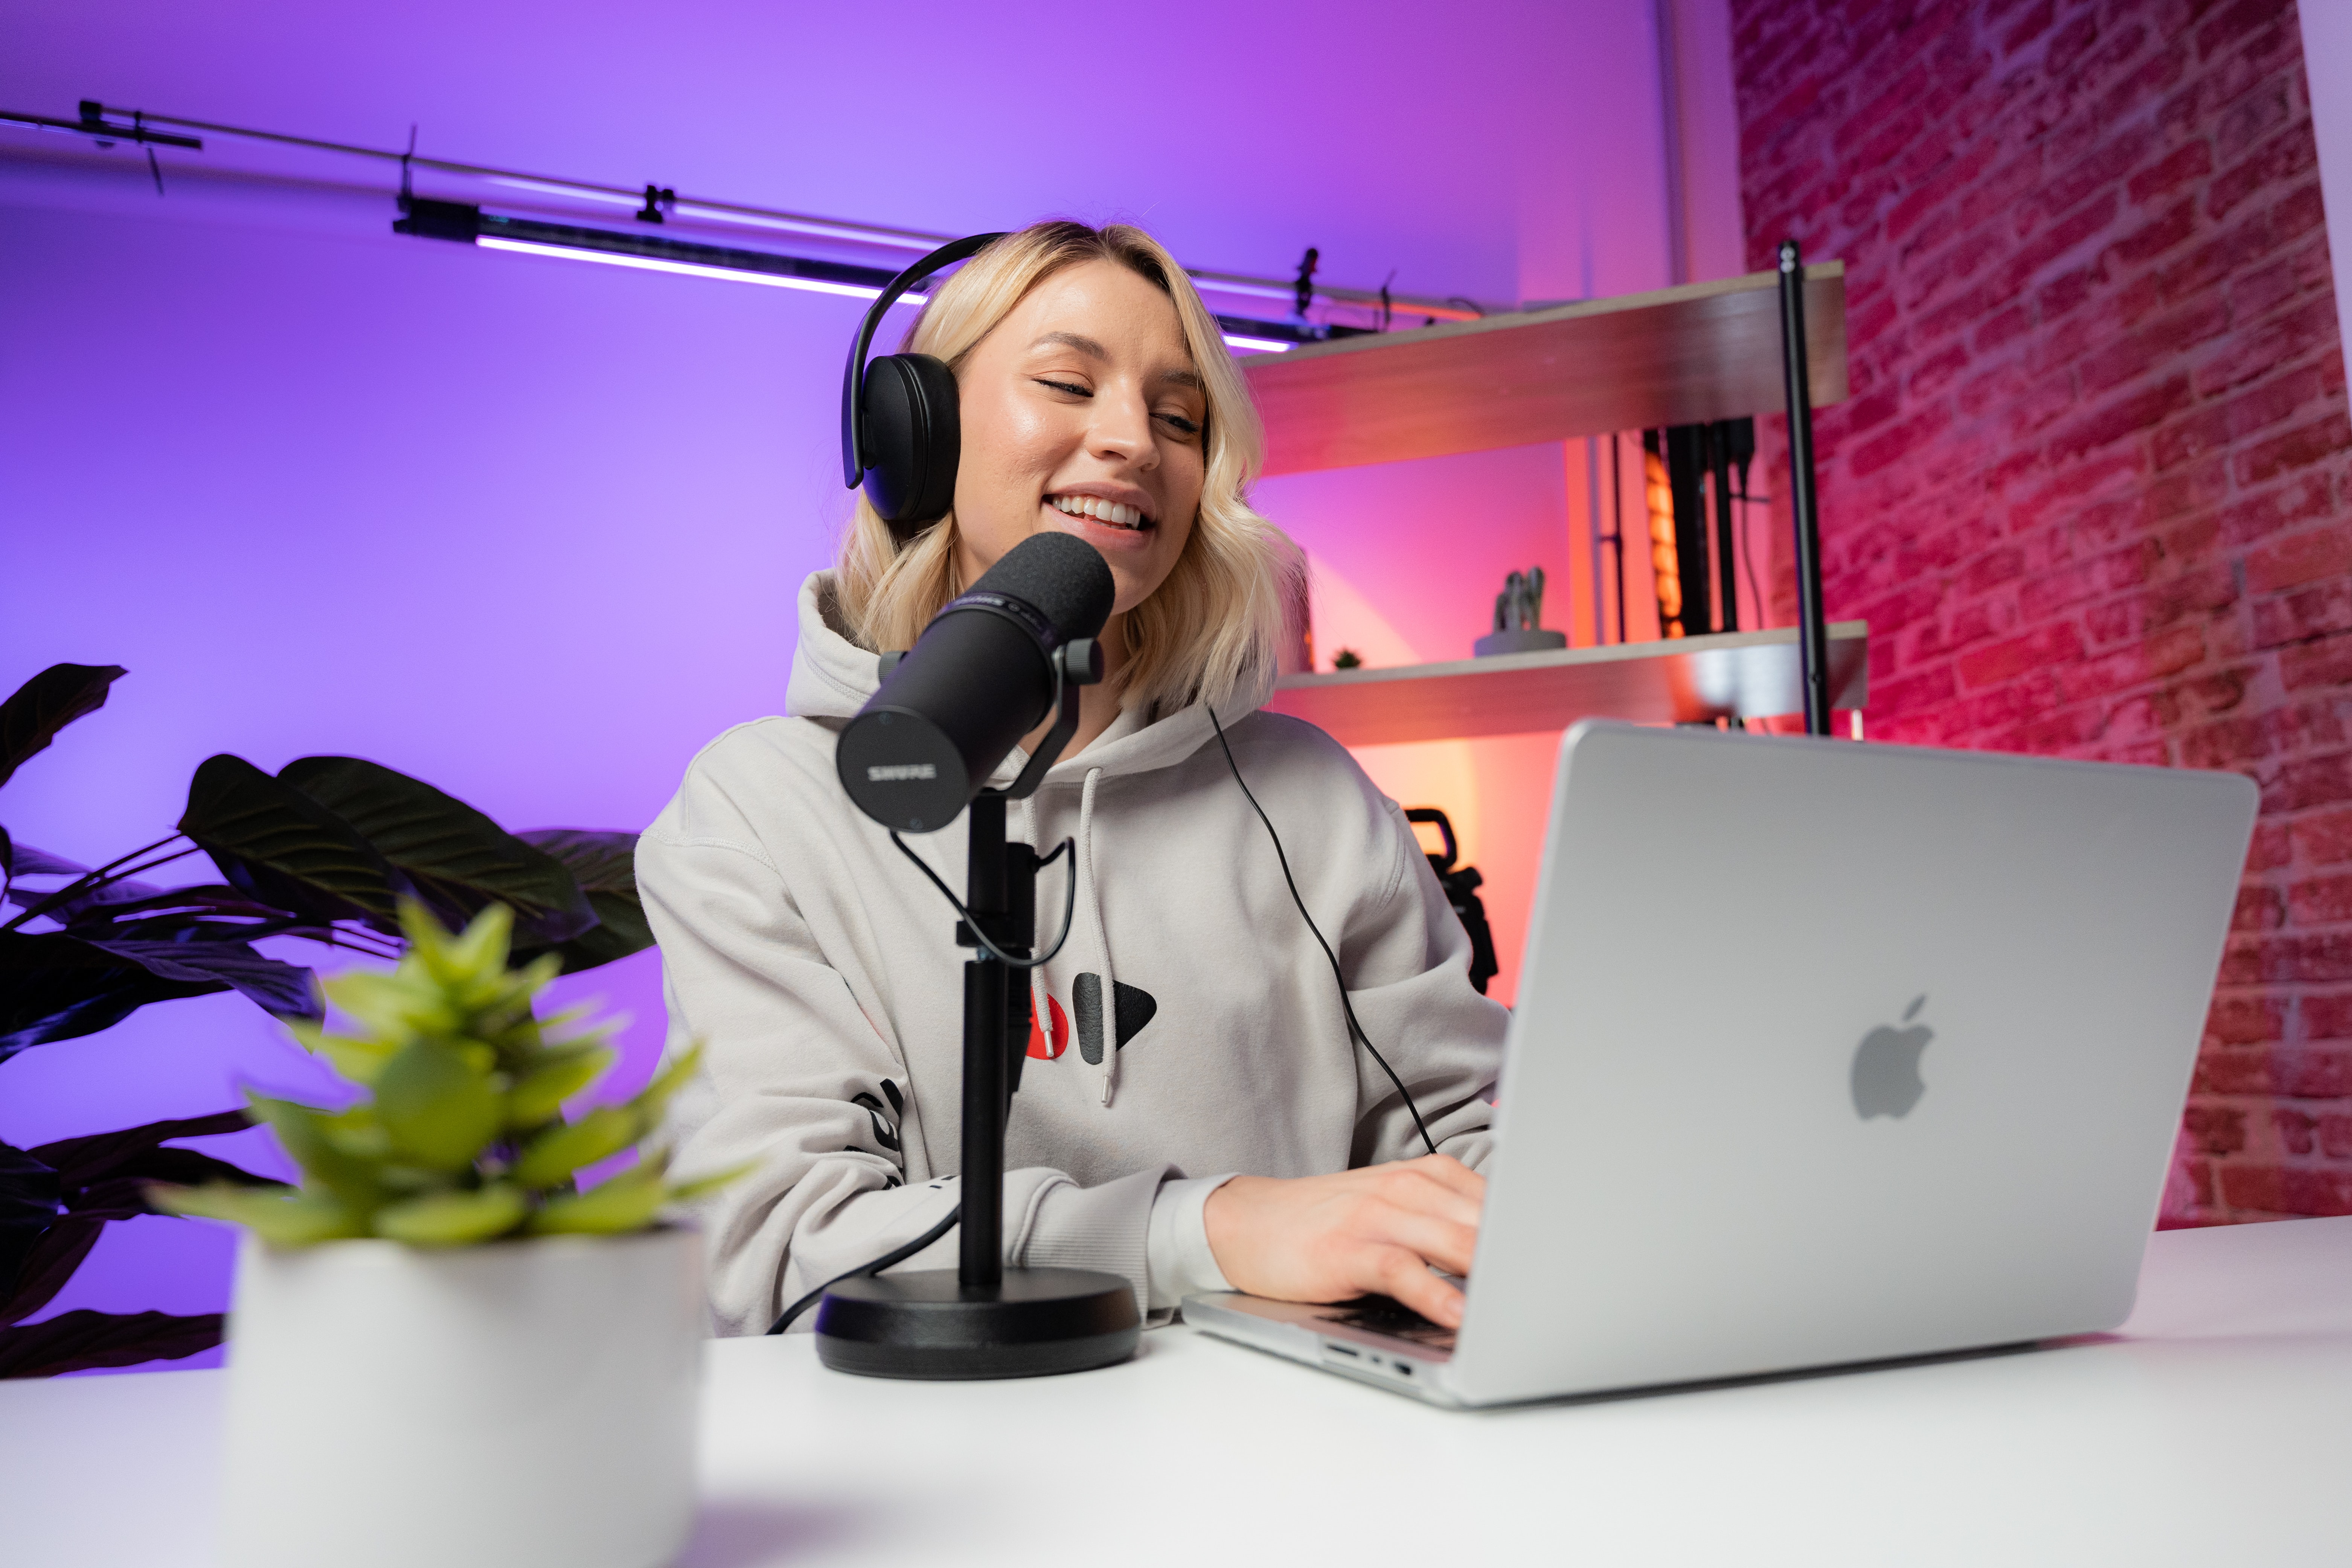 A photograph of a fair-skinned, woman with light blonde hair sitting at a wooden desk. She is smiling and working on a silver Mac laptop. She wears a silver hoodie. She has on a set of black headphones and appears to be speaking into a black microphone. Beside the laptop is a small green plant in a white pot. Behind her is a wall lit by purple light and just out of frame is a larger plant in one corner. In the other corner is a wooden shelf against a red brick wall.